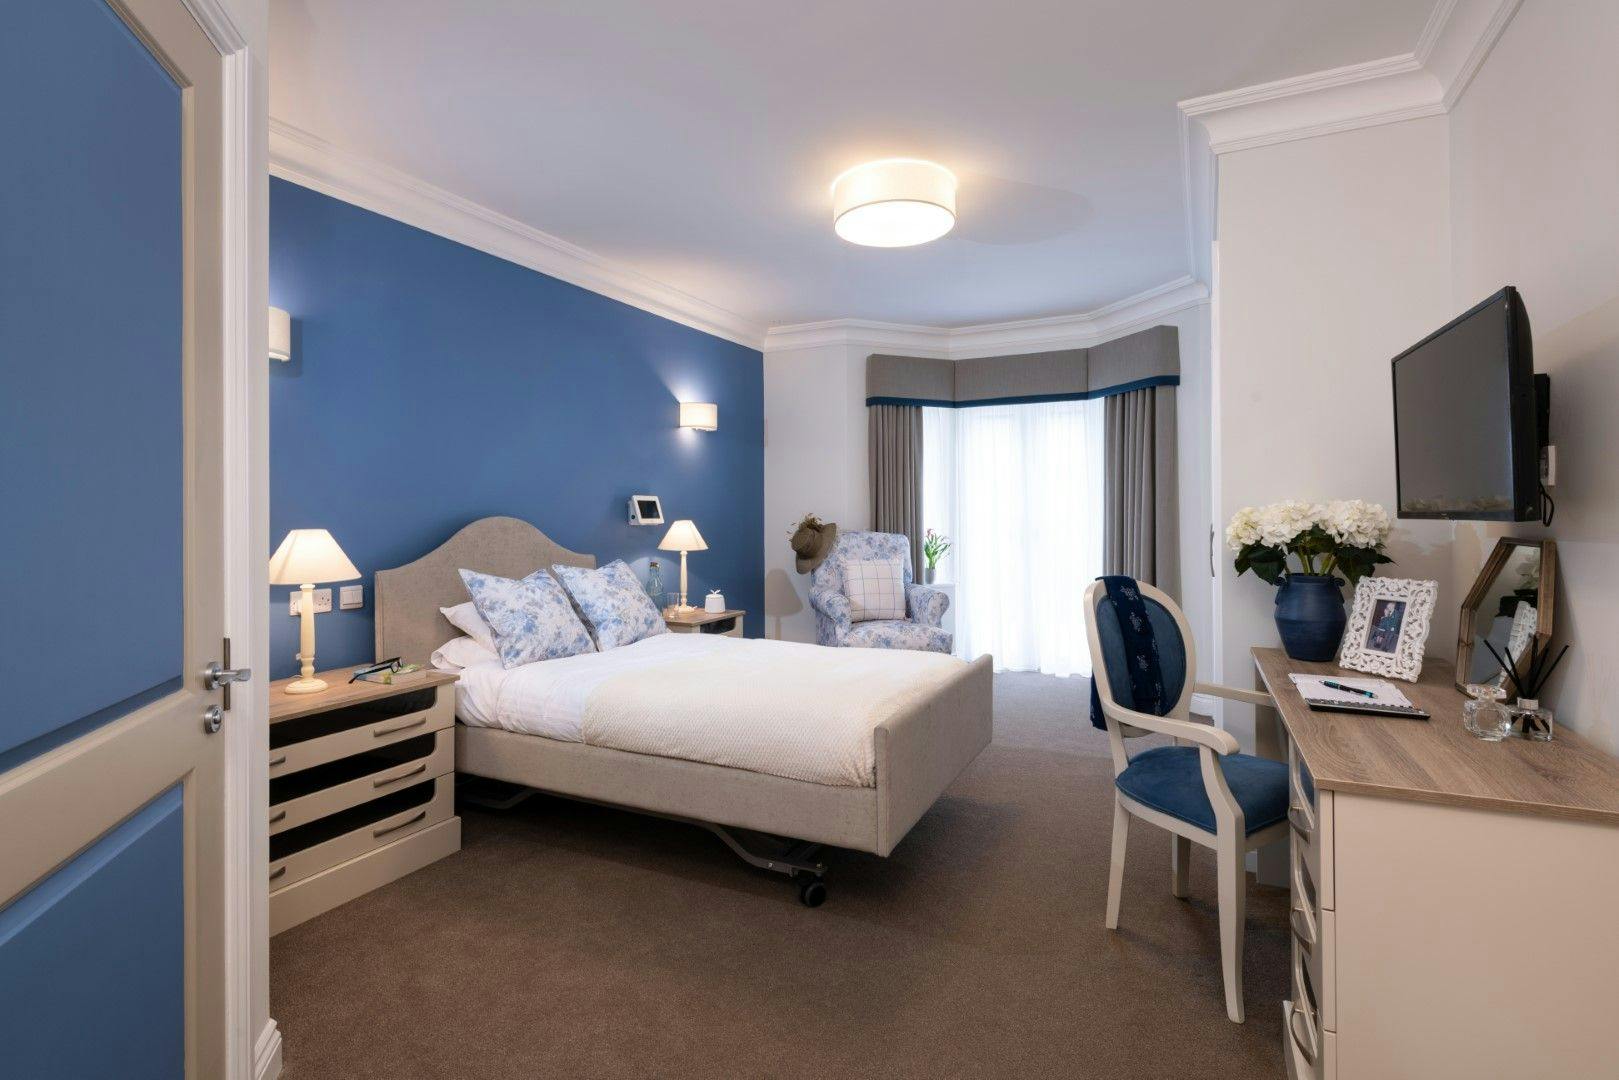 Bedroom at Henley Manor Care Home in Henley-on-Thames, South Oxfordshire